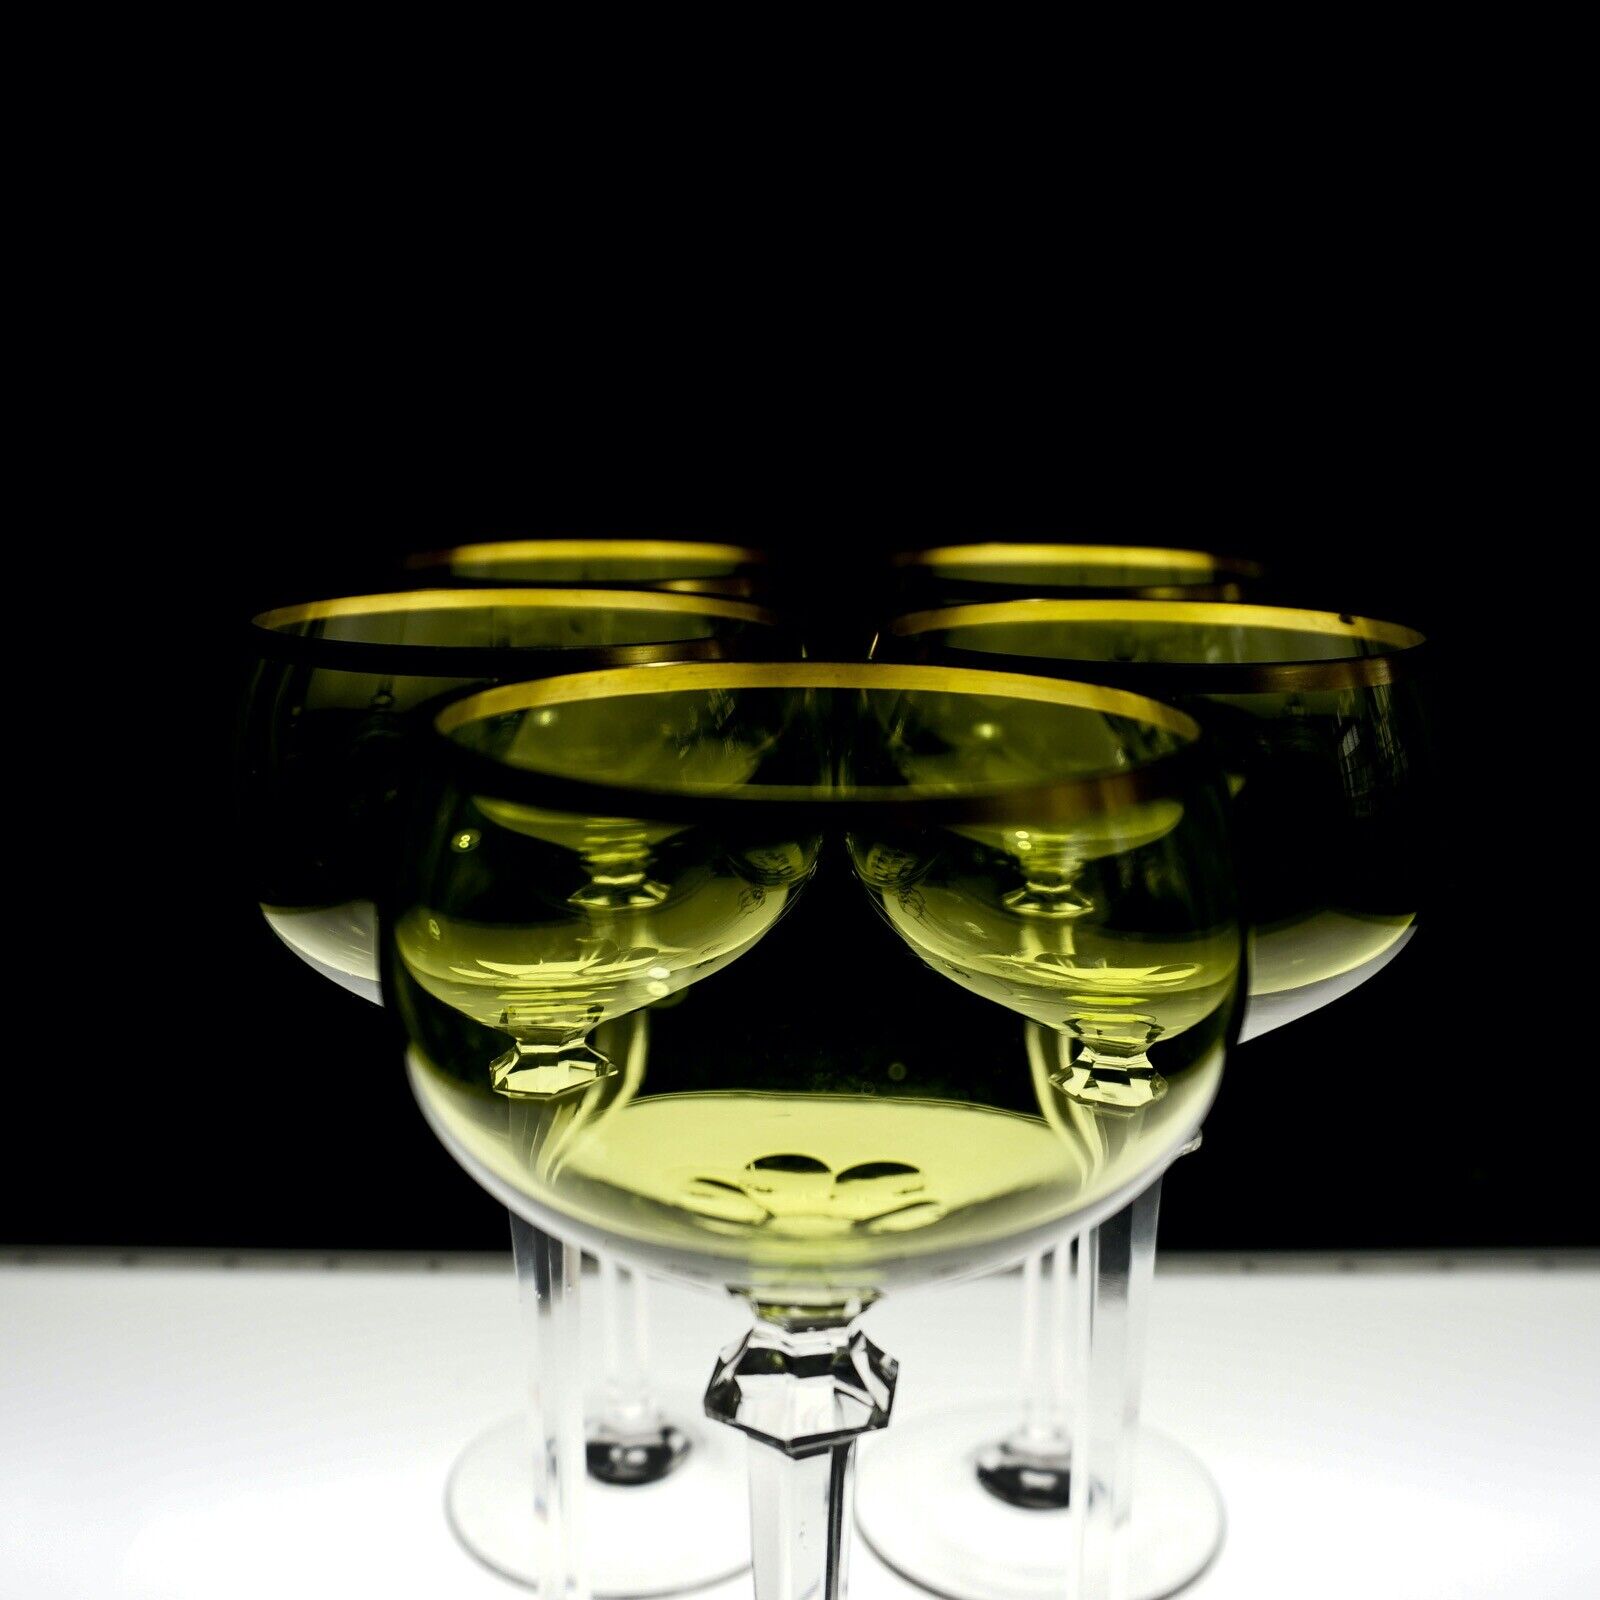 Five Green Handmade Wine Glasses Theresienthal To 1900 Attributed To V. Z